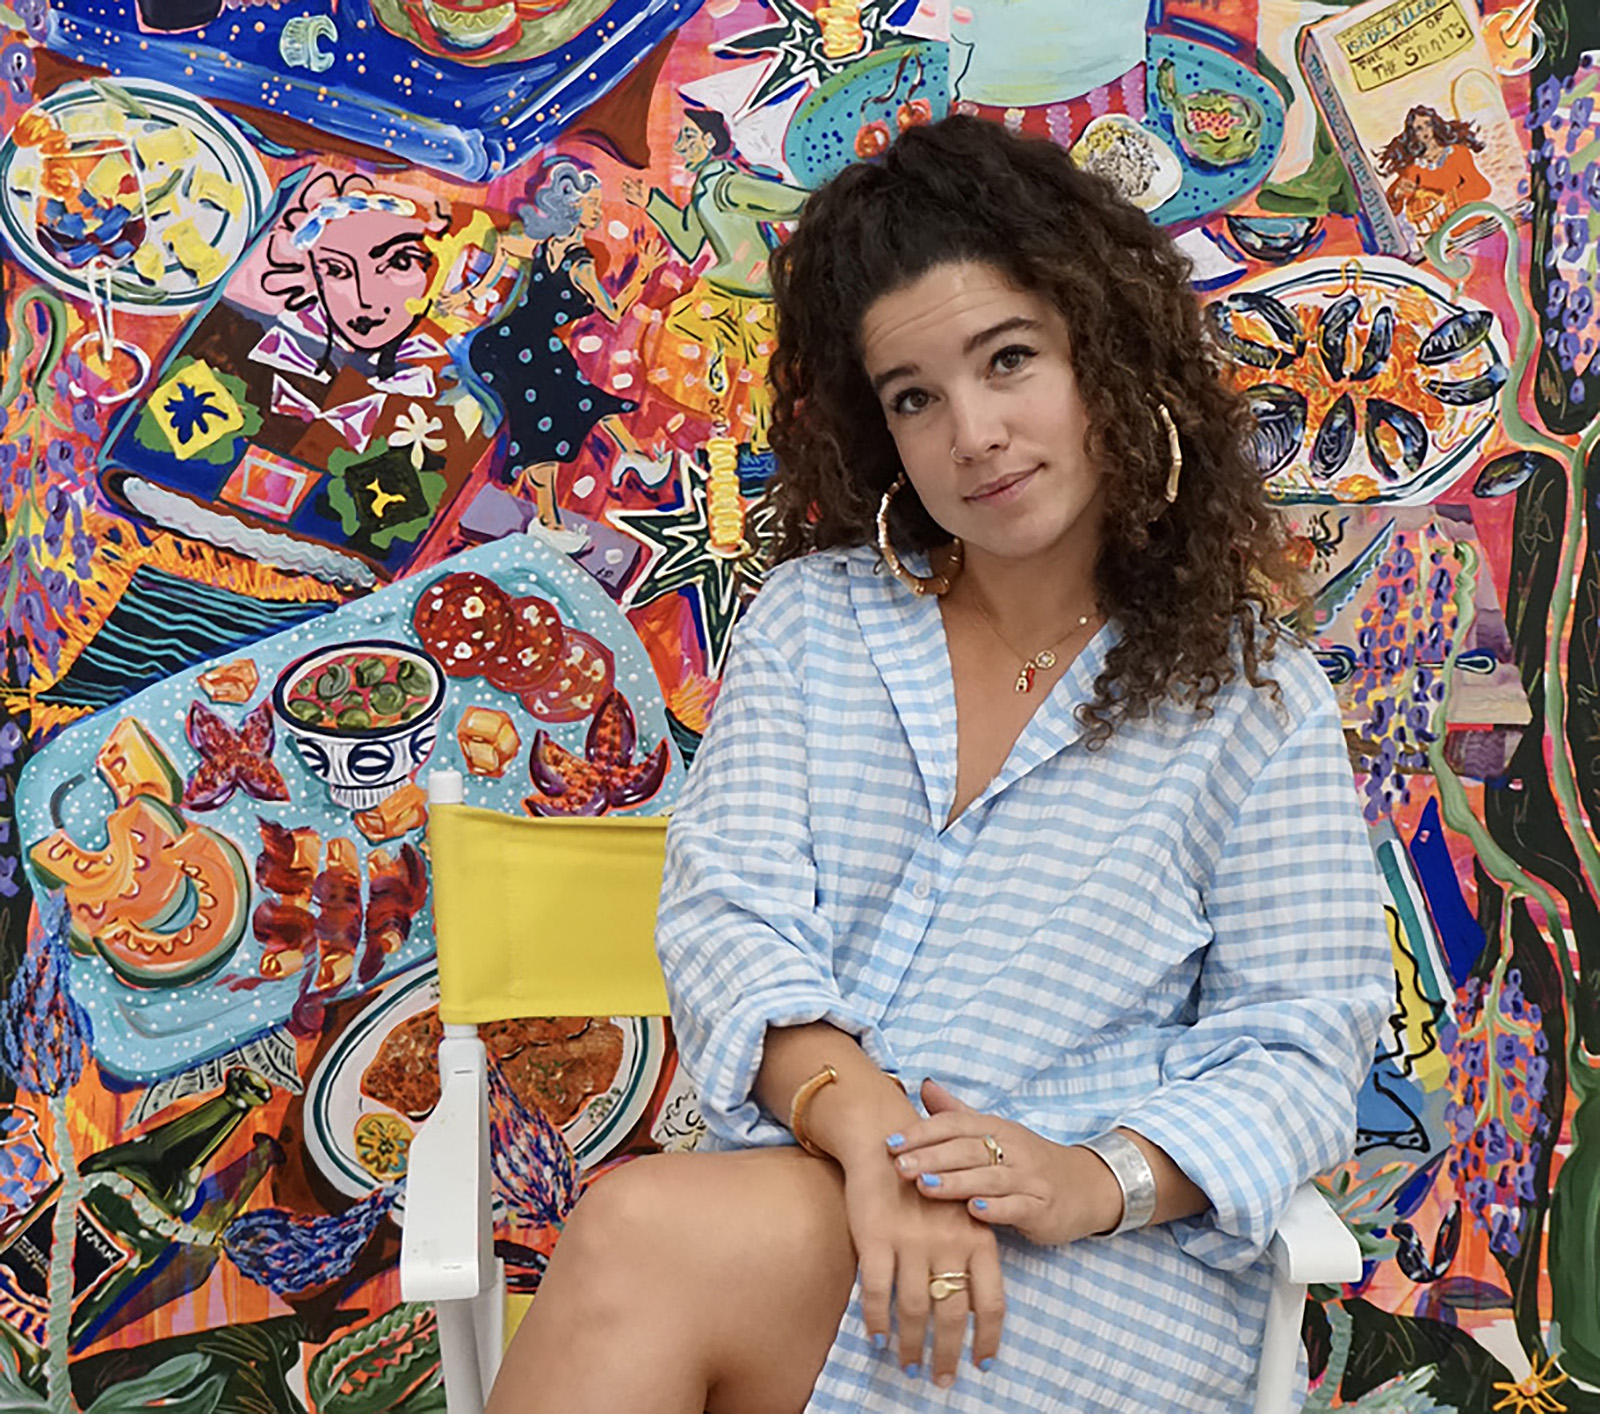 Pincus-Whitney poses in front of one of her colorful paintings